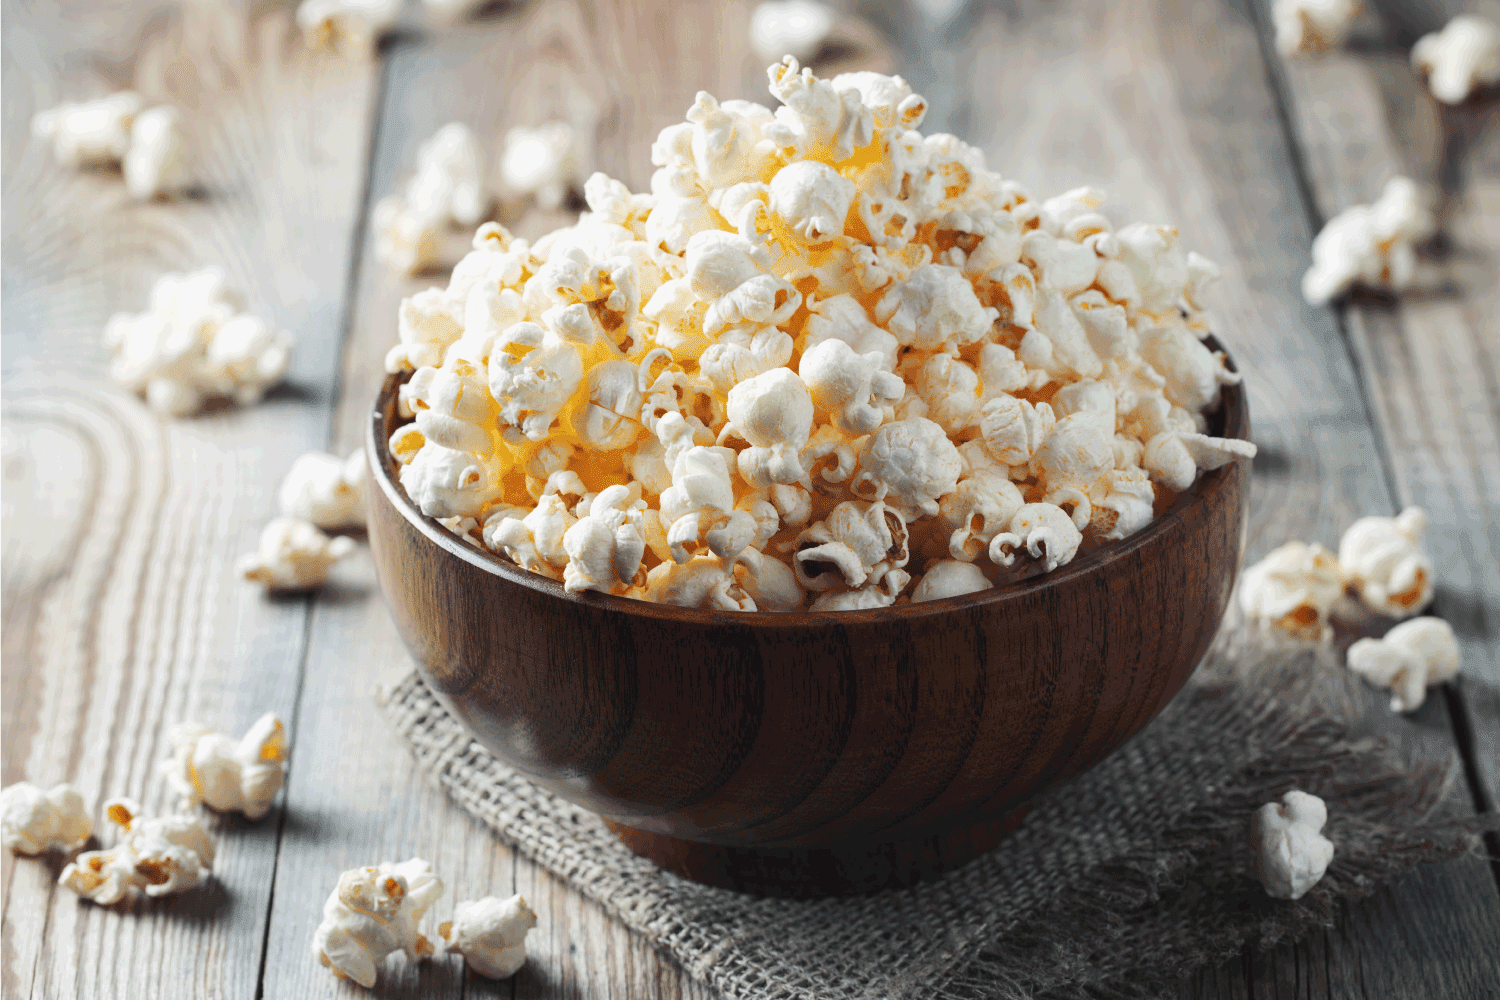 A wooden bowl of salted popcorn at the old wooden table